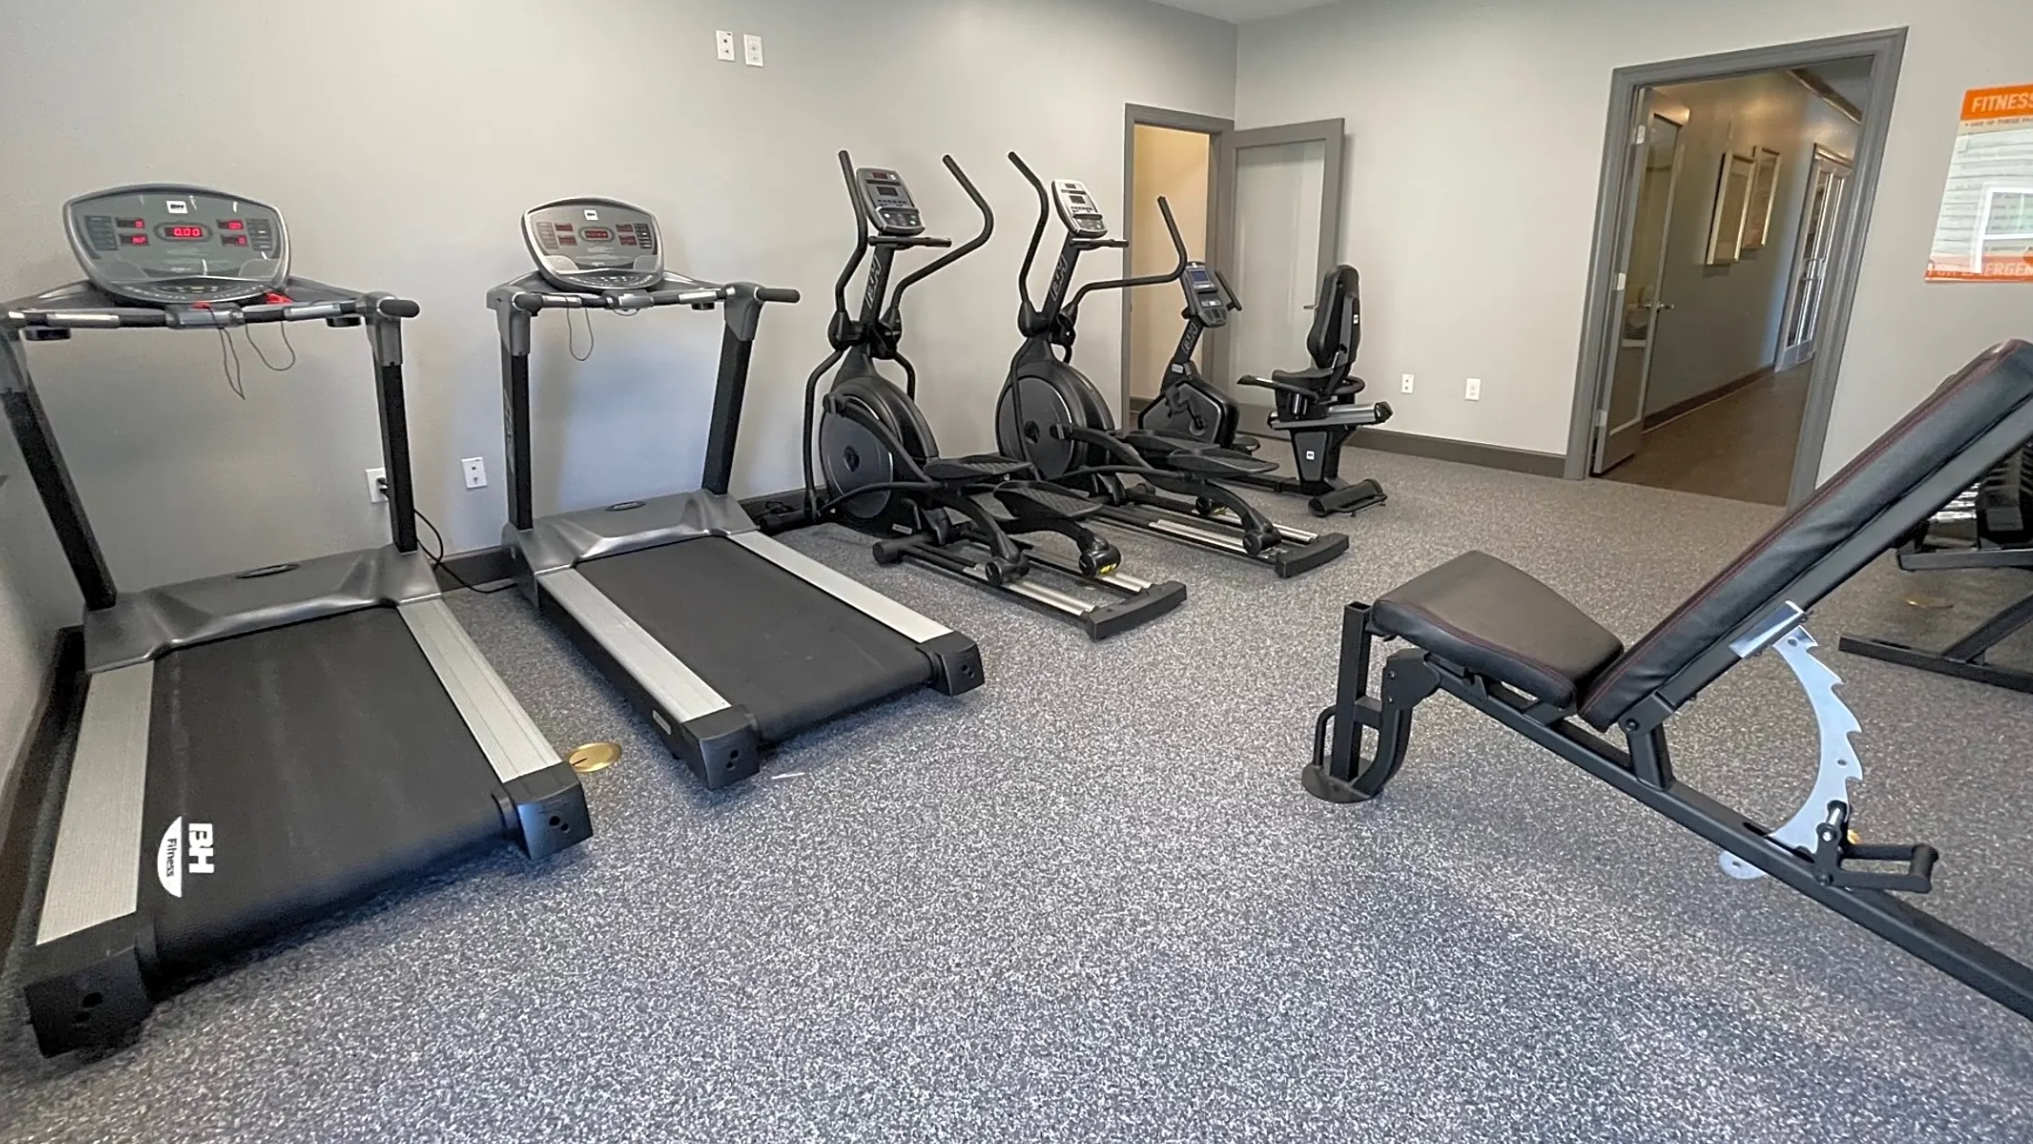 Fitness center with cardio and free weights.